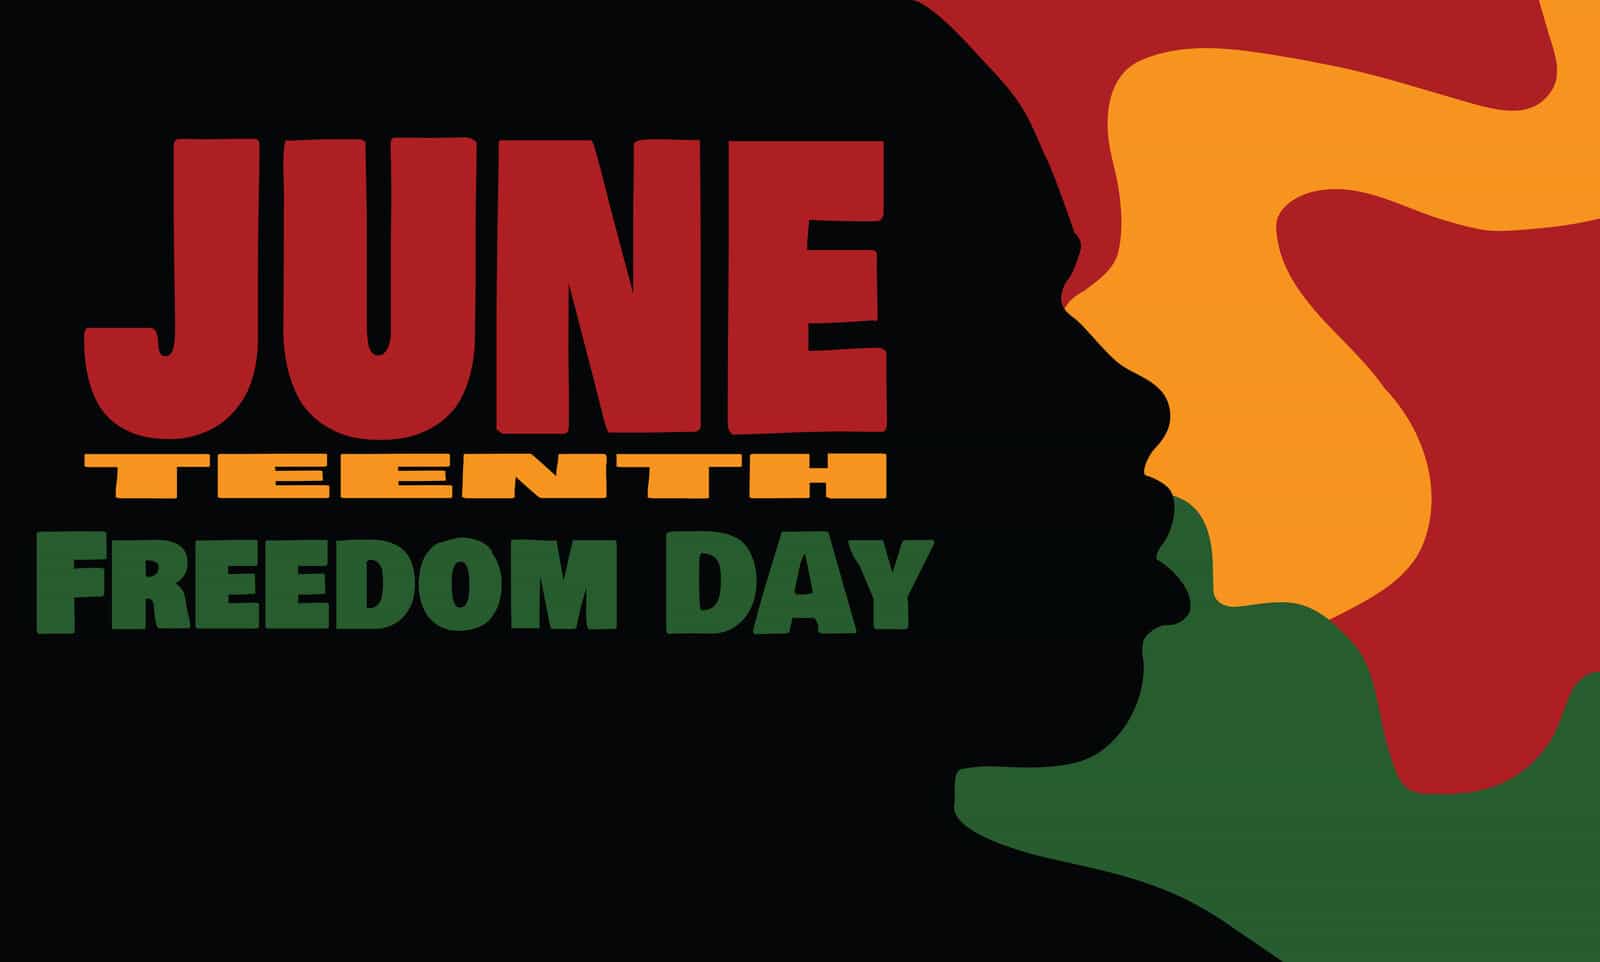 Social Justice in Cannabis and the Juneteenth Holiday